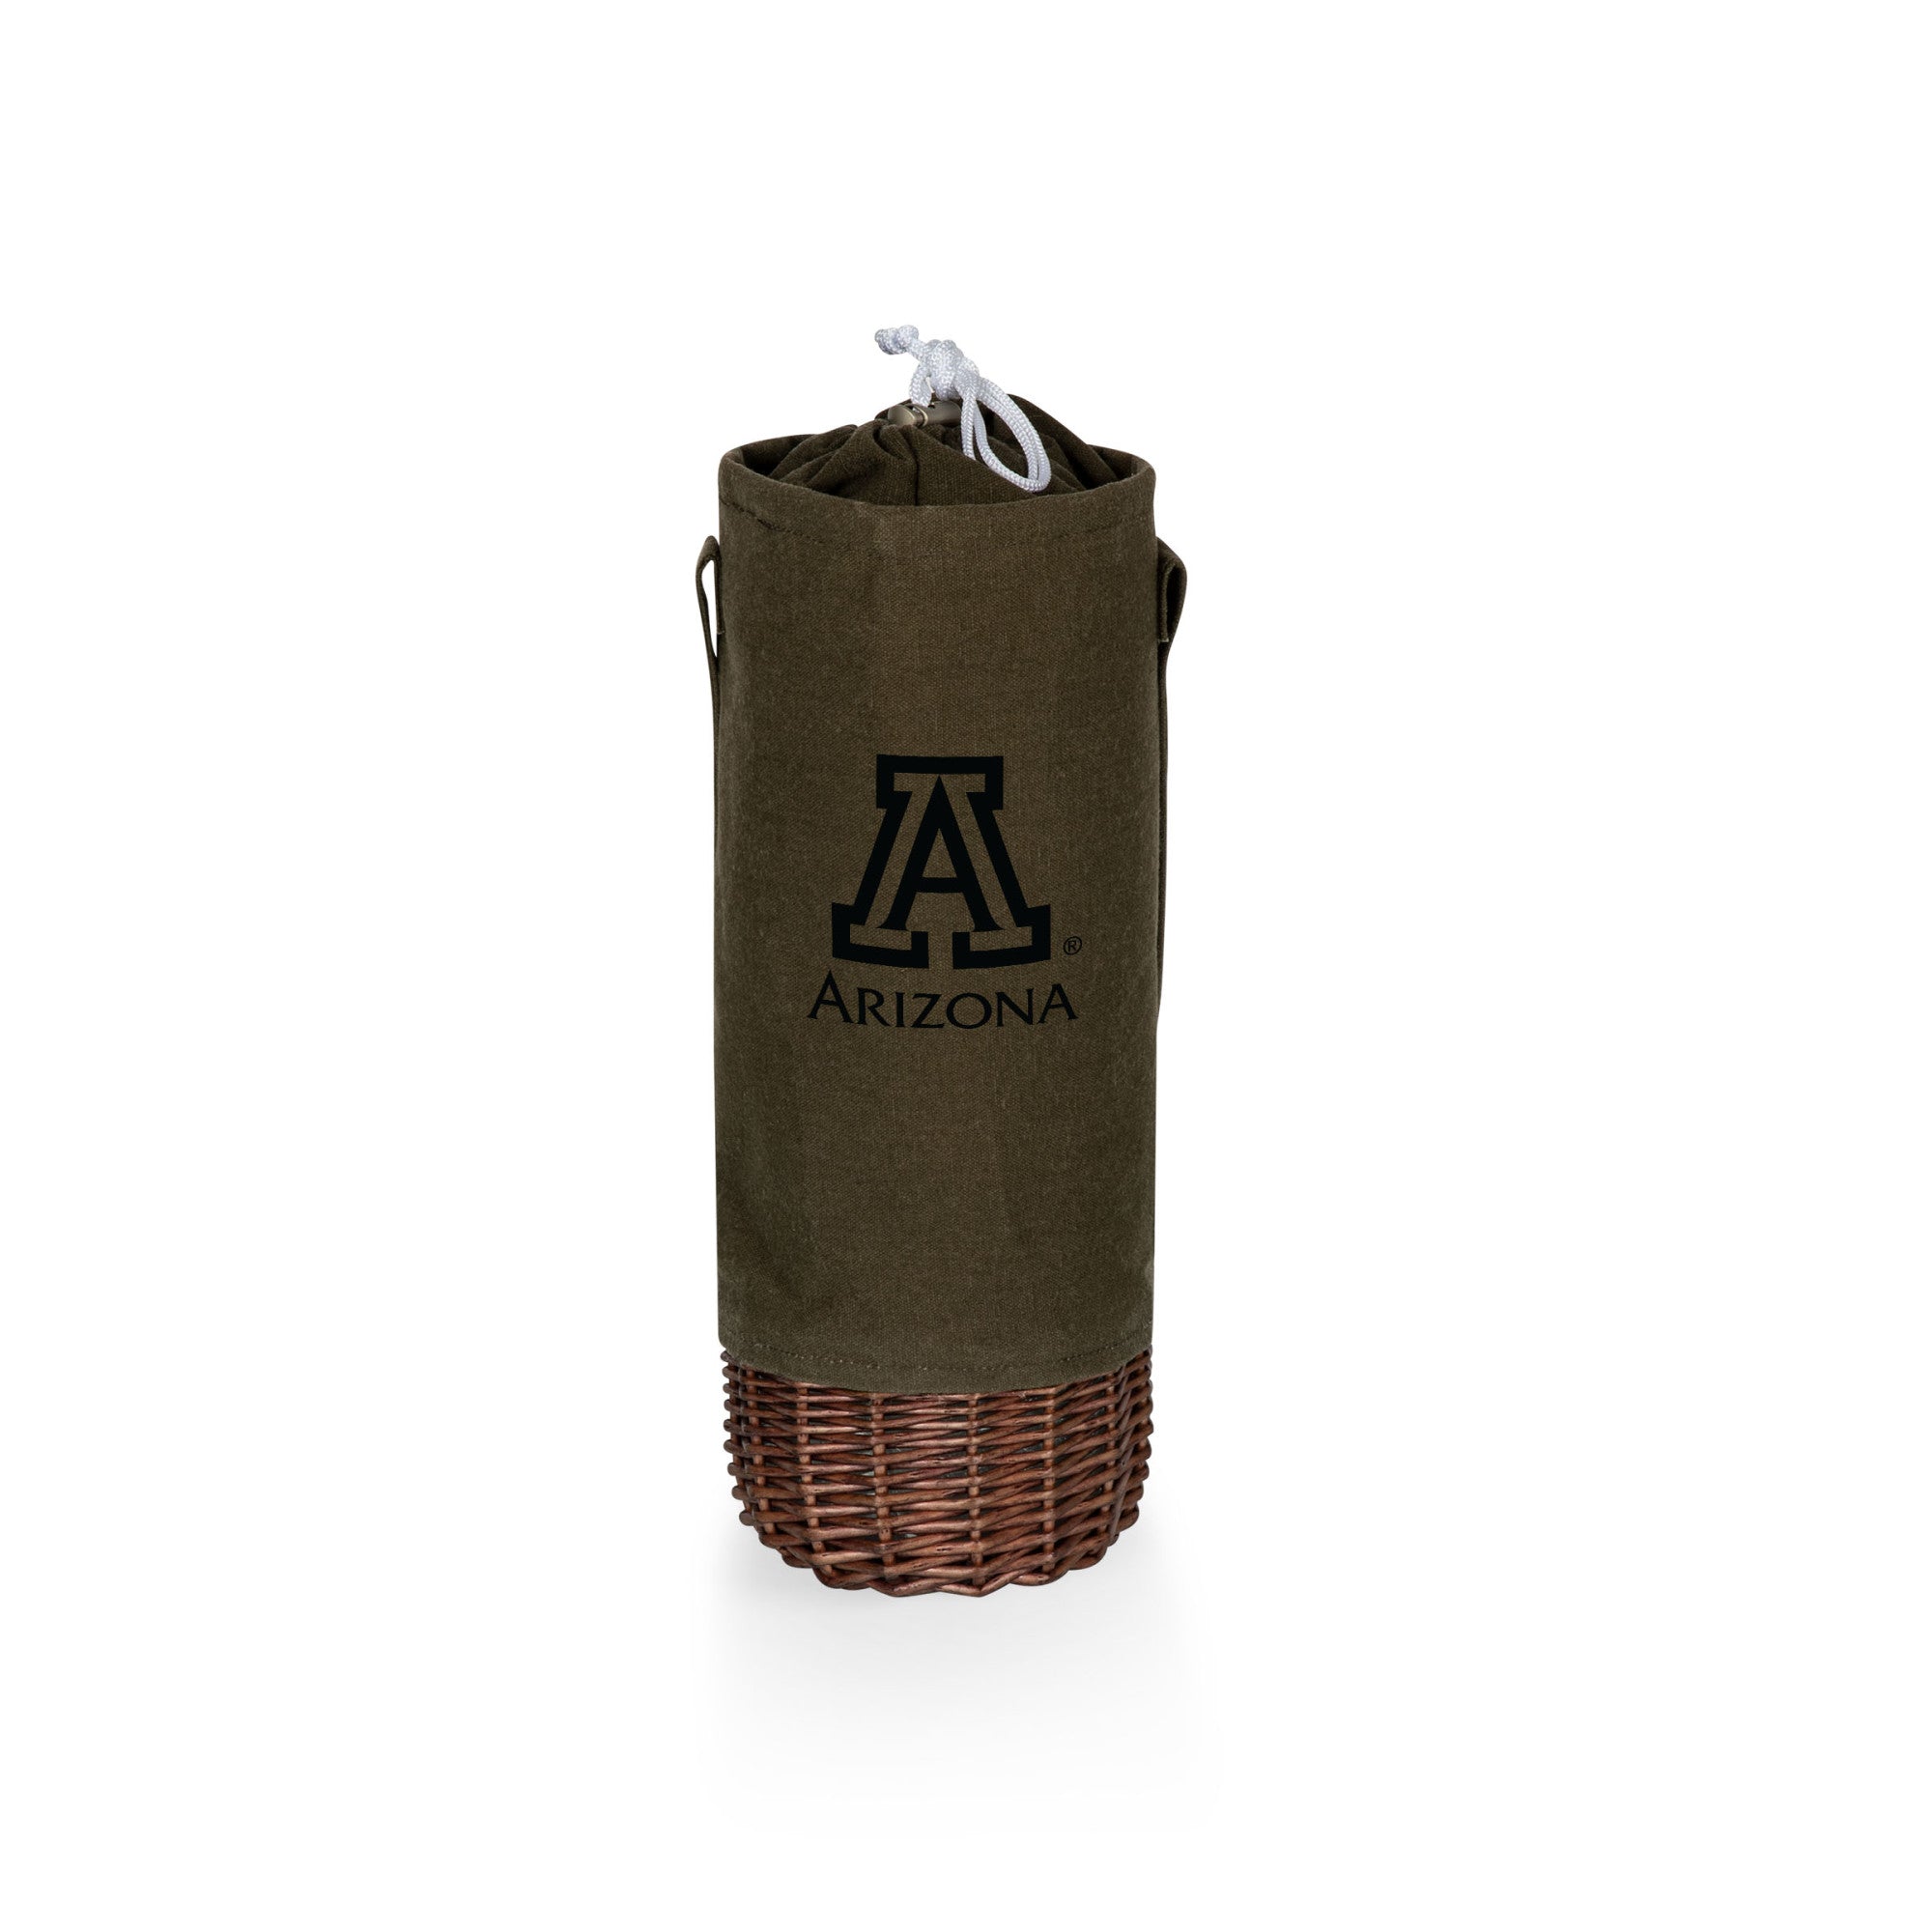 Arizona Wildcats - Malbec Insulated Canvas and Willow Wine Bottle Basket